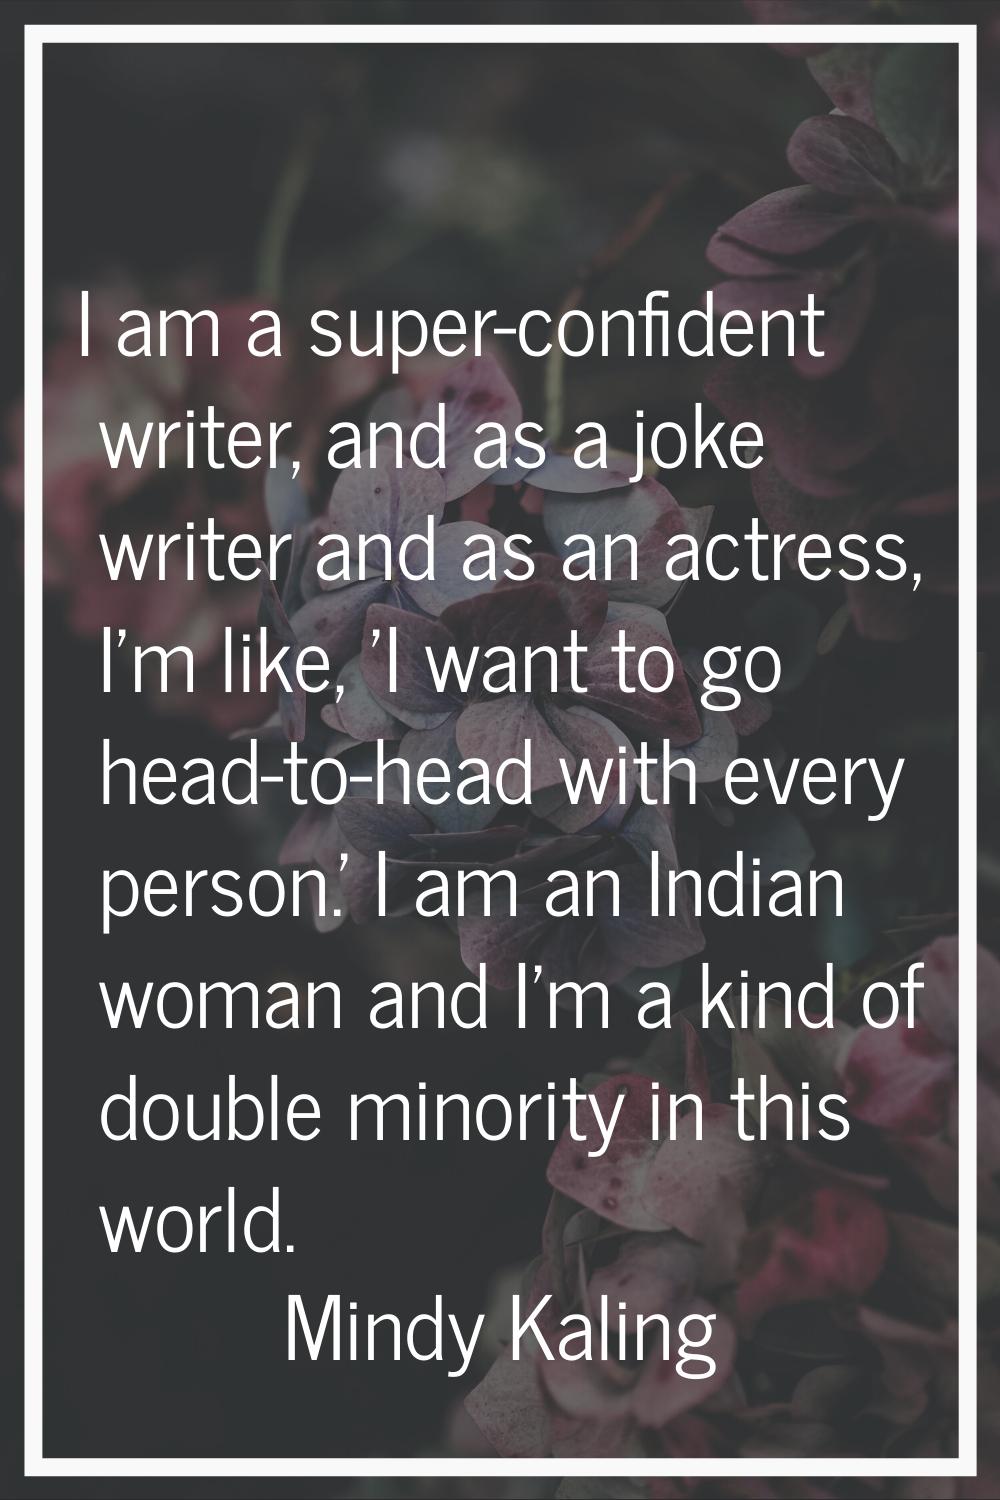 I am a super-confident writer, and as a joke writer and as an actress, I'm like, 'I want to go head